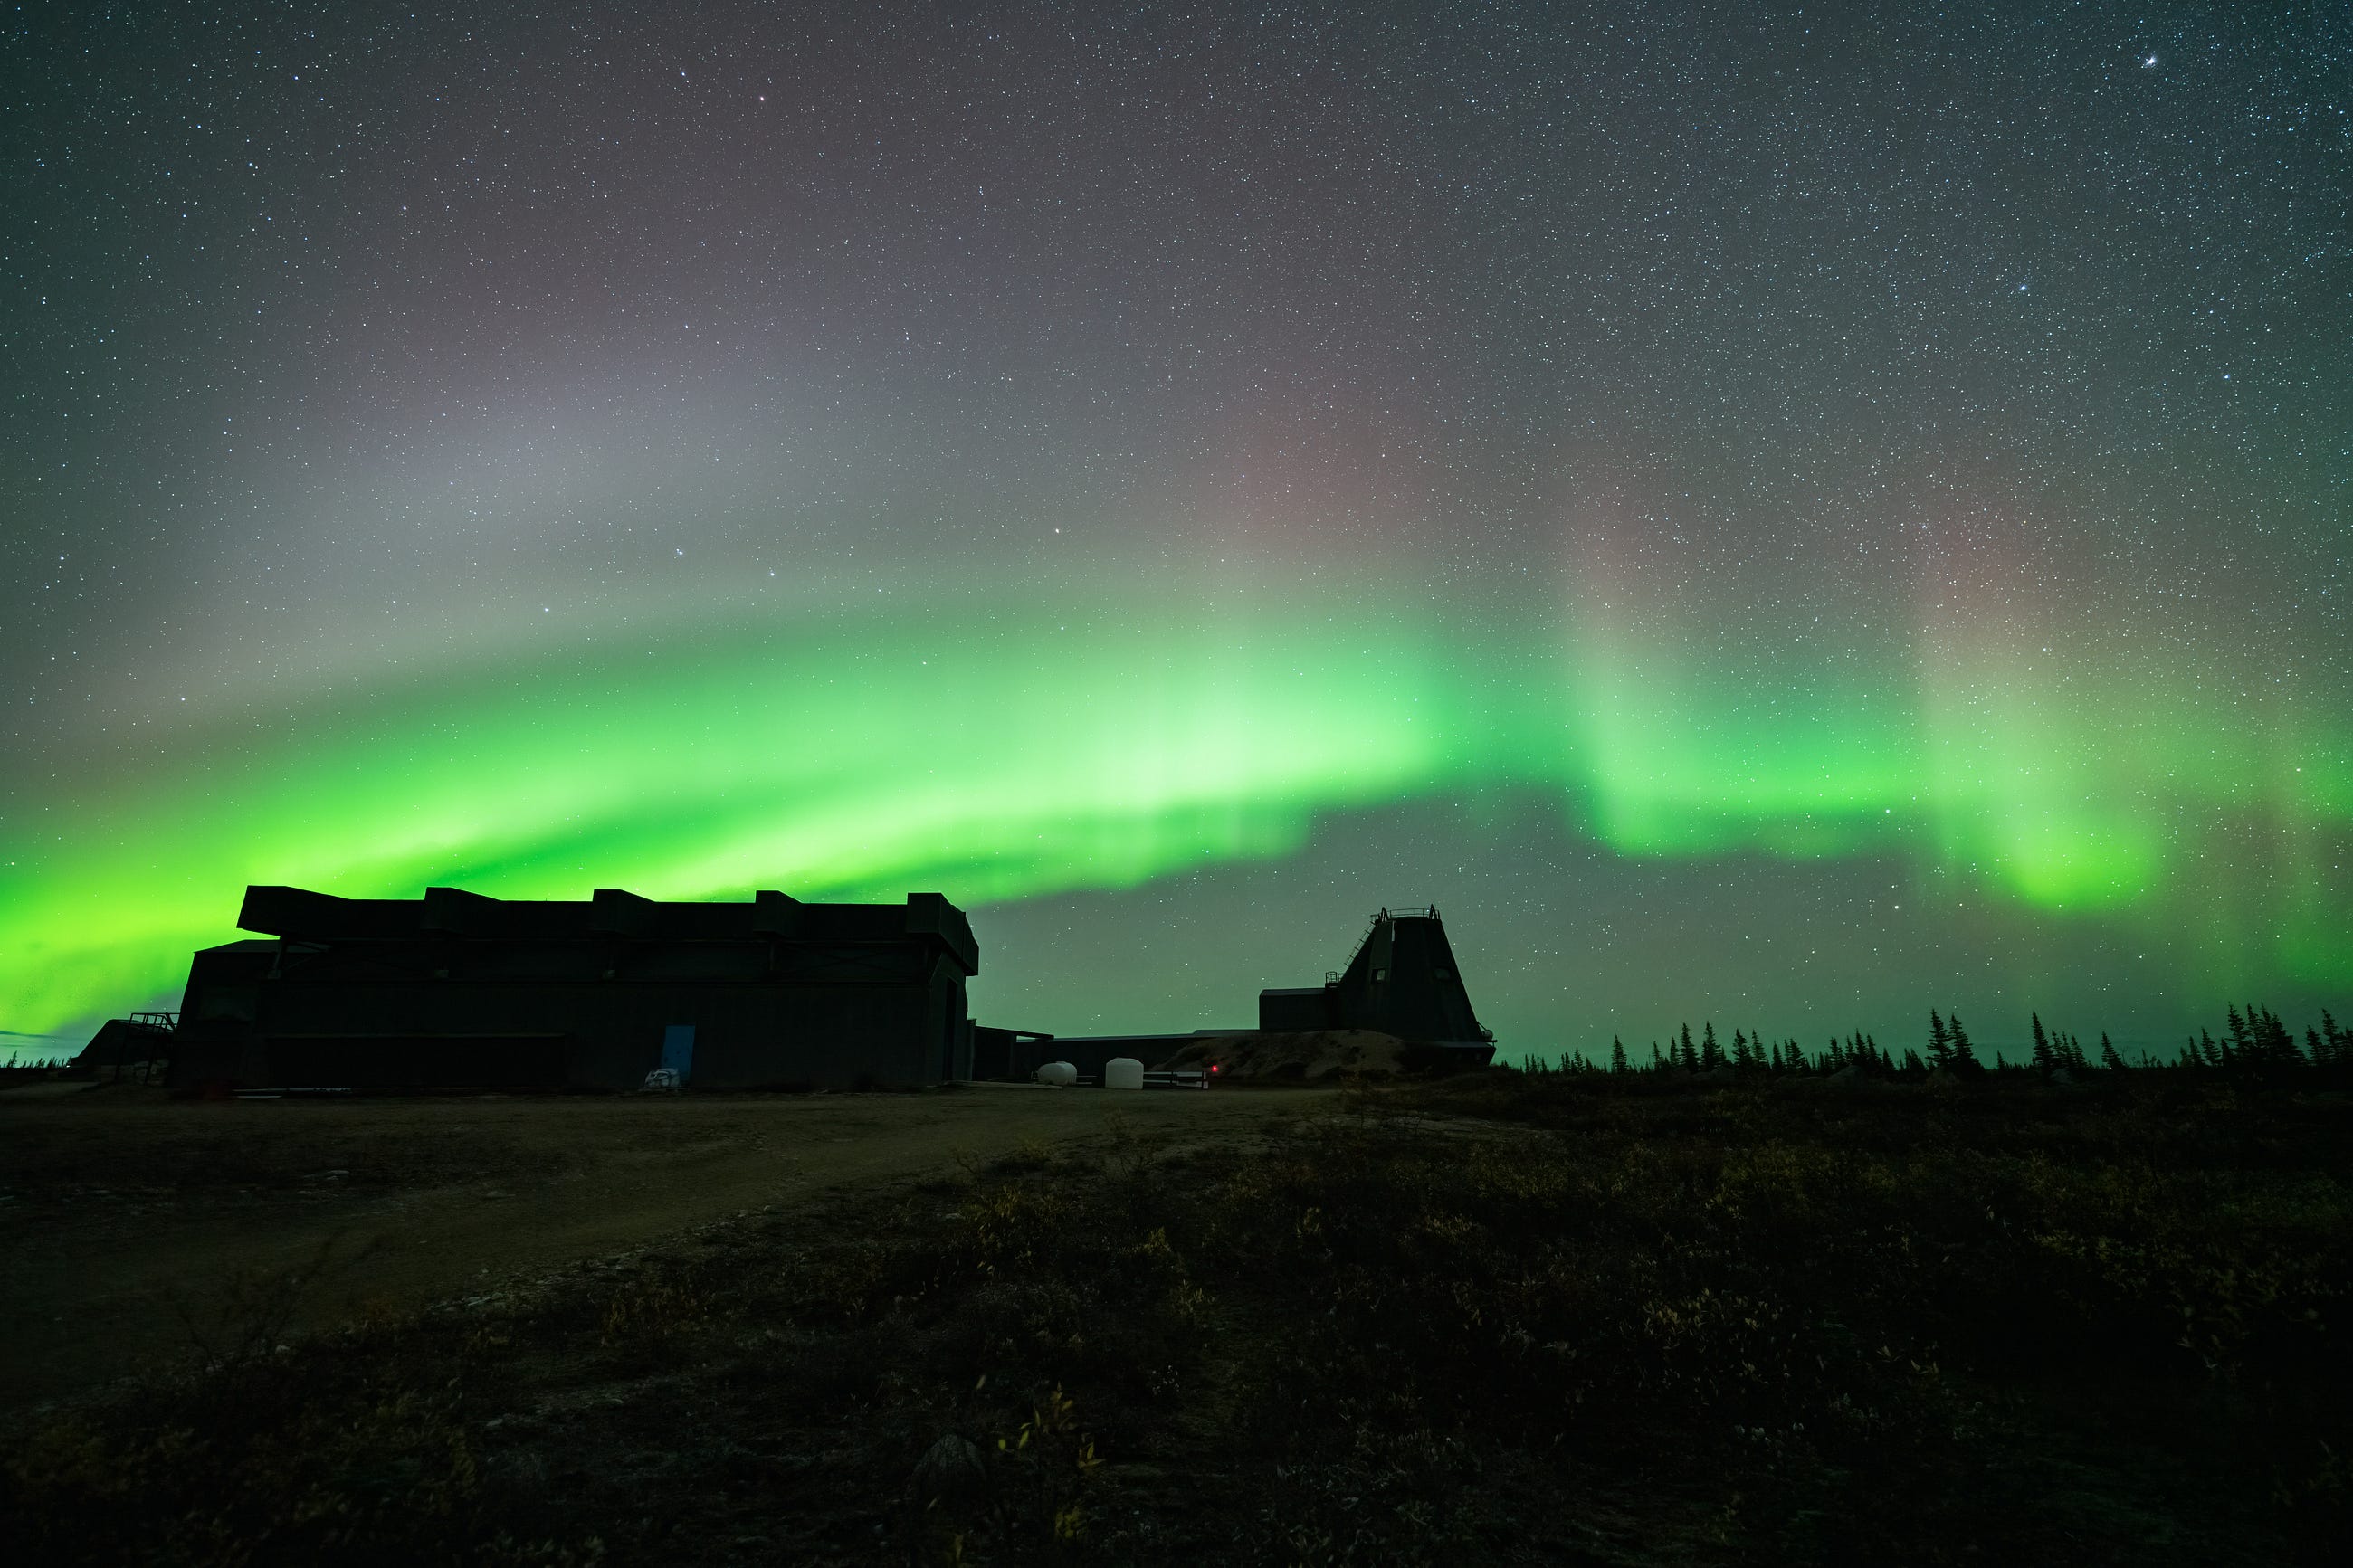 A Night to Remember: Q&A on the Northern Lights with “The Aurora G